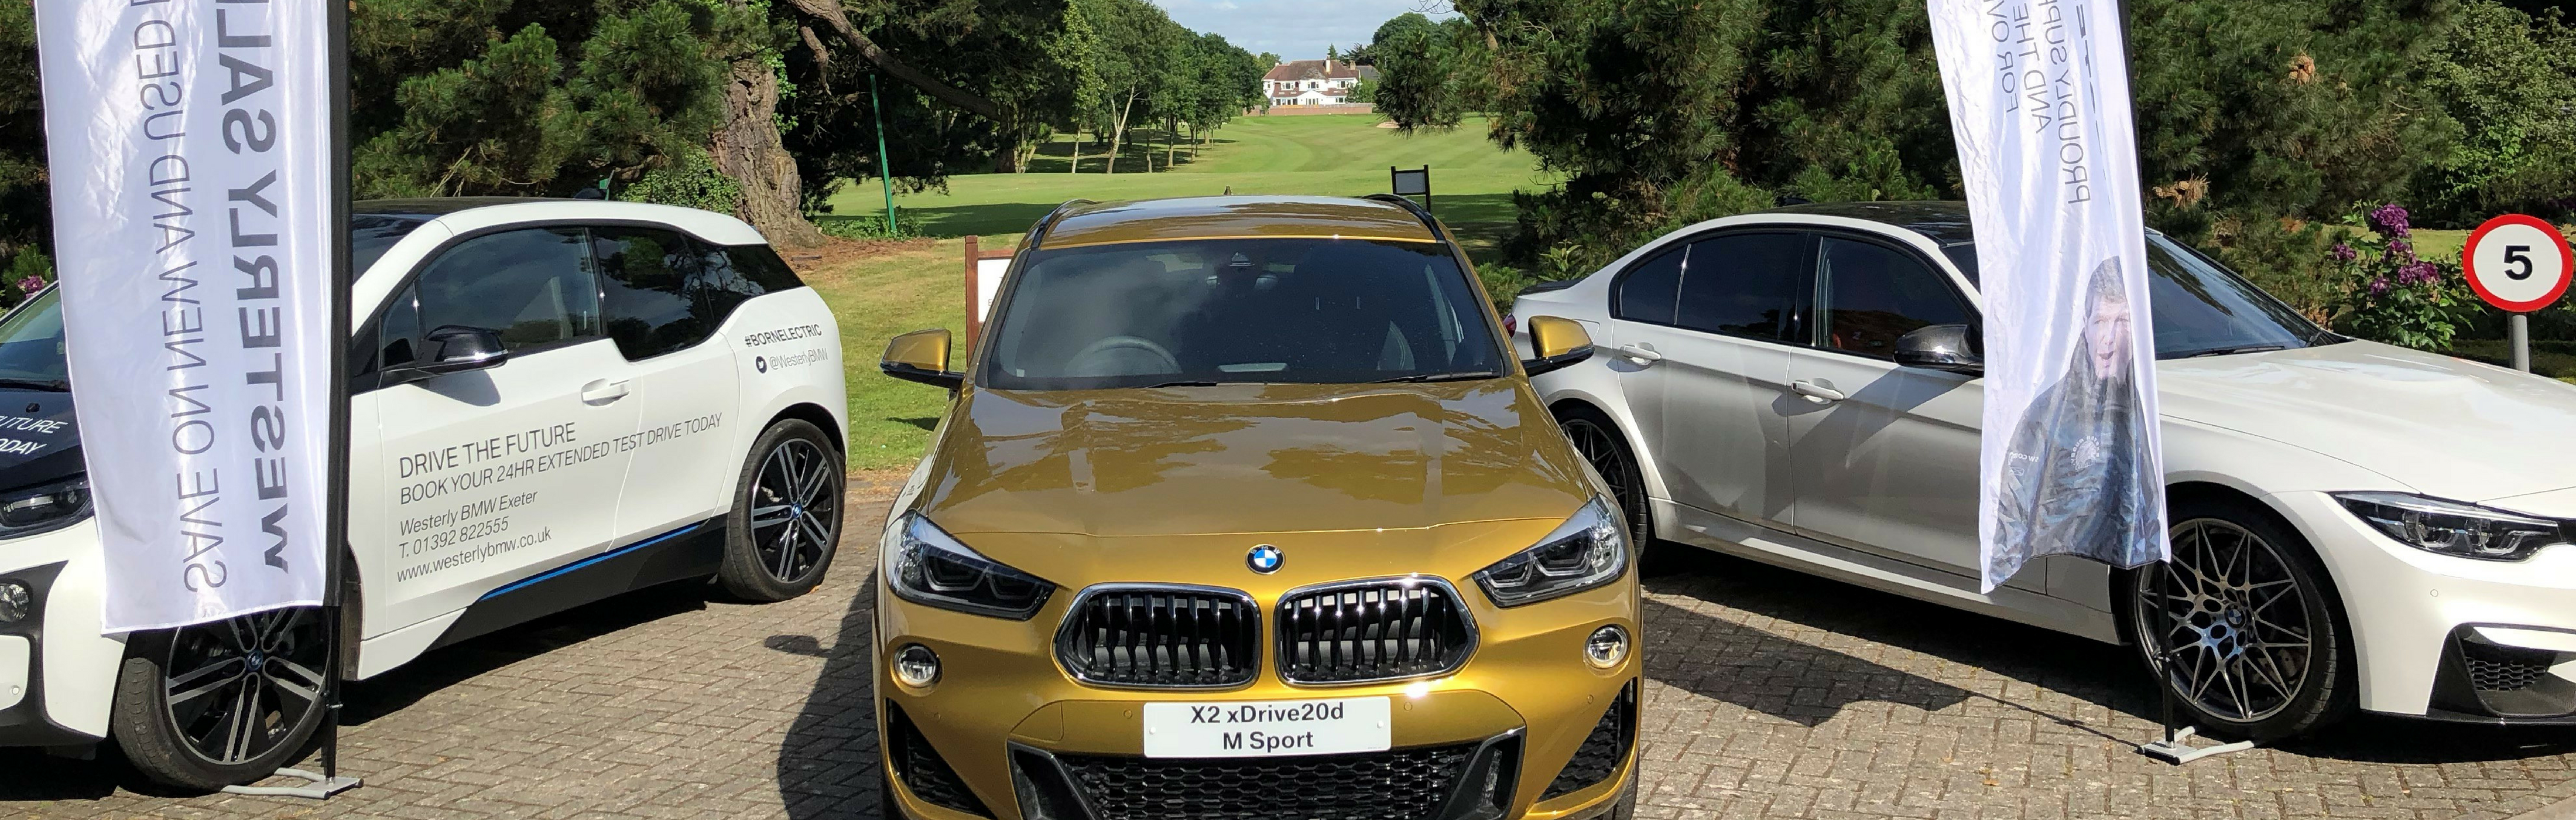 corporate golf car placement exeter golf and country club